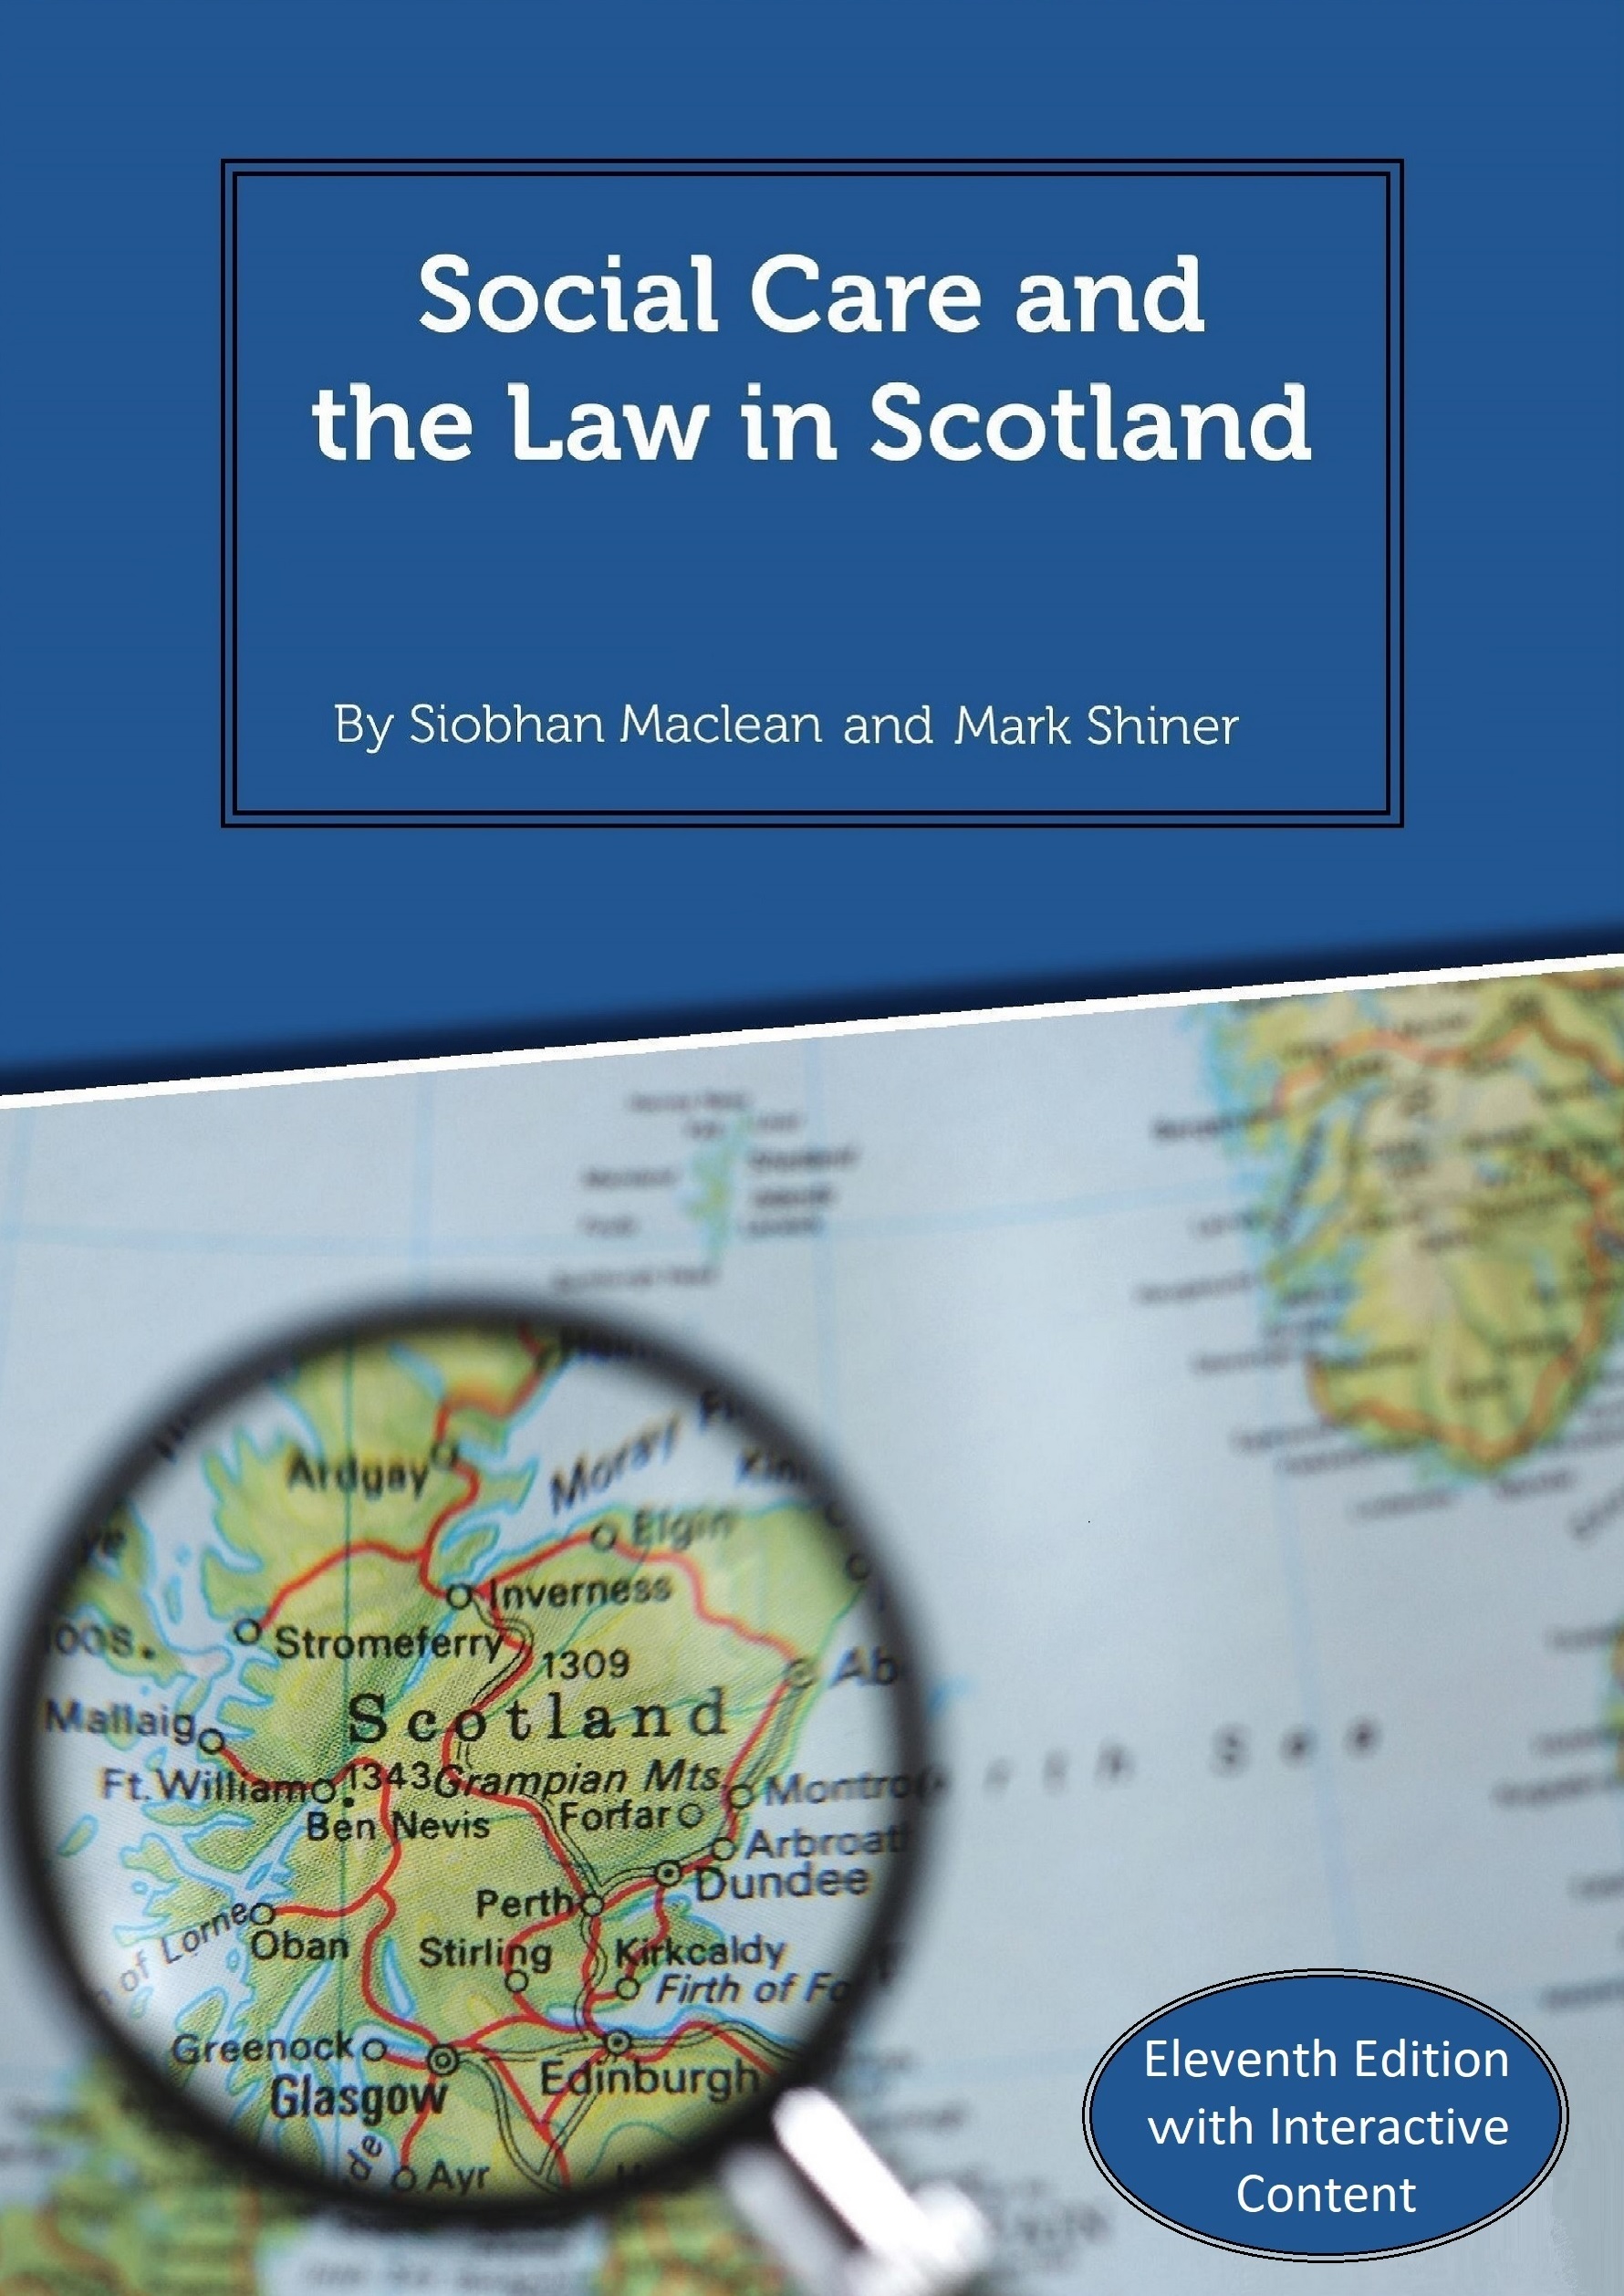 Social Care and the Law in Scotland - 11th Edition 2018